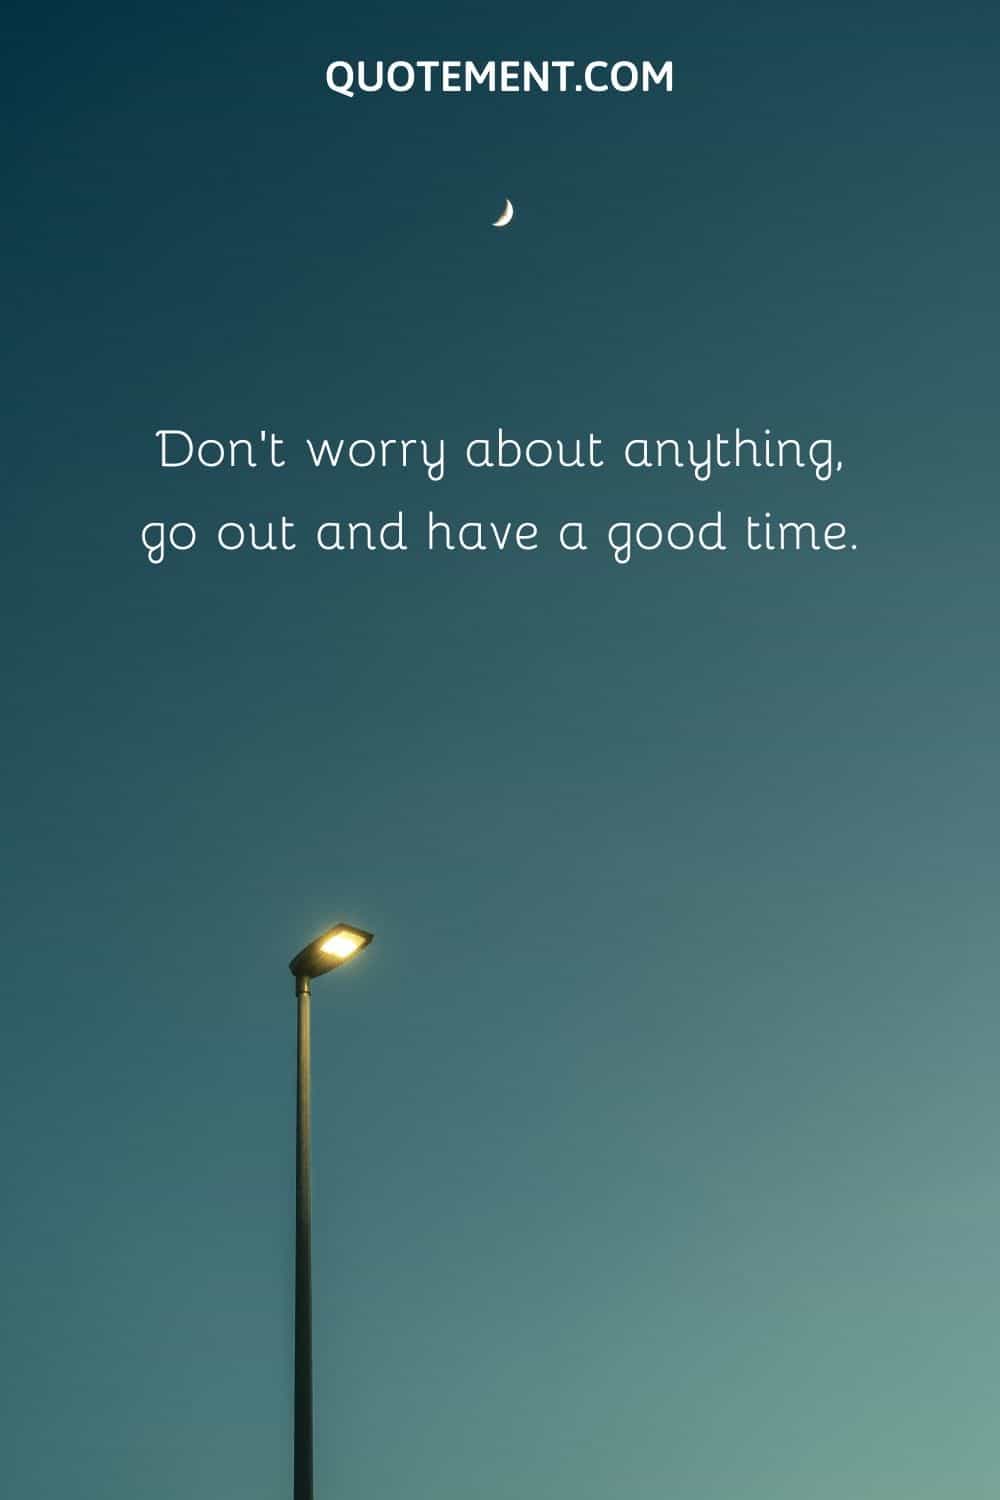 Don’t worry about anything, go out and have a good time